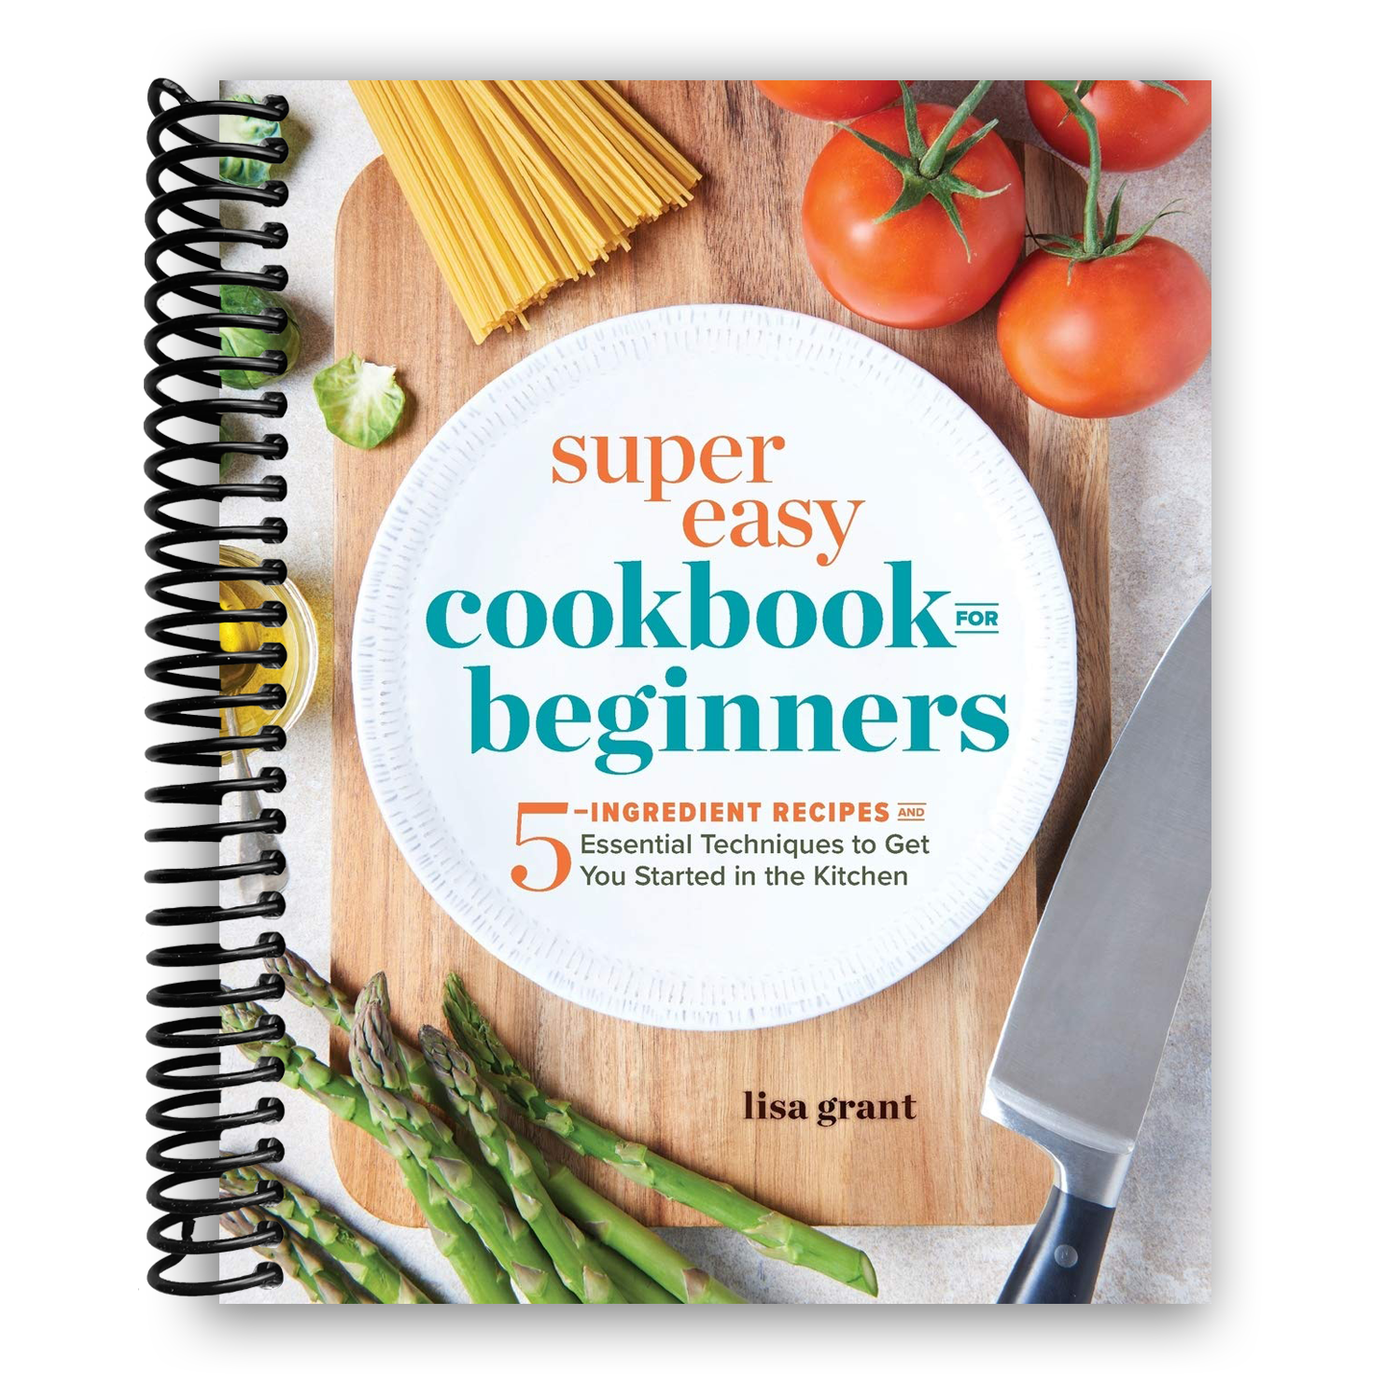 Super Easy Cookbook for Beginners: 5-Ingredient Recipes and Essential Techniques to Get You Started in the Kitchen (Spiral Bound)